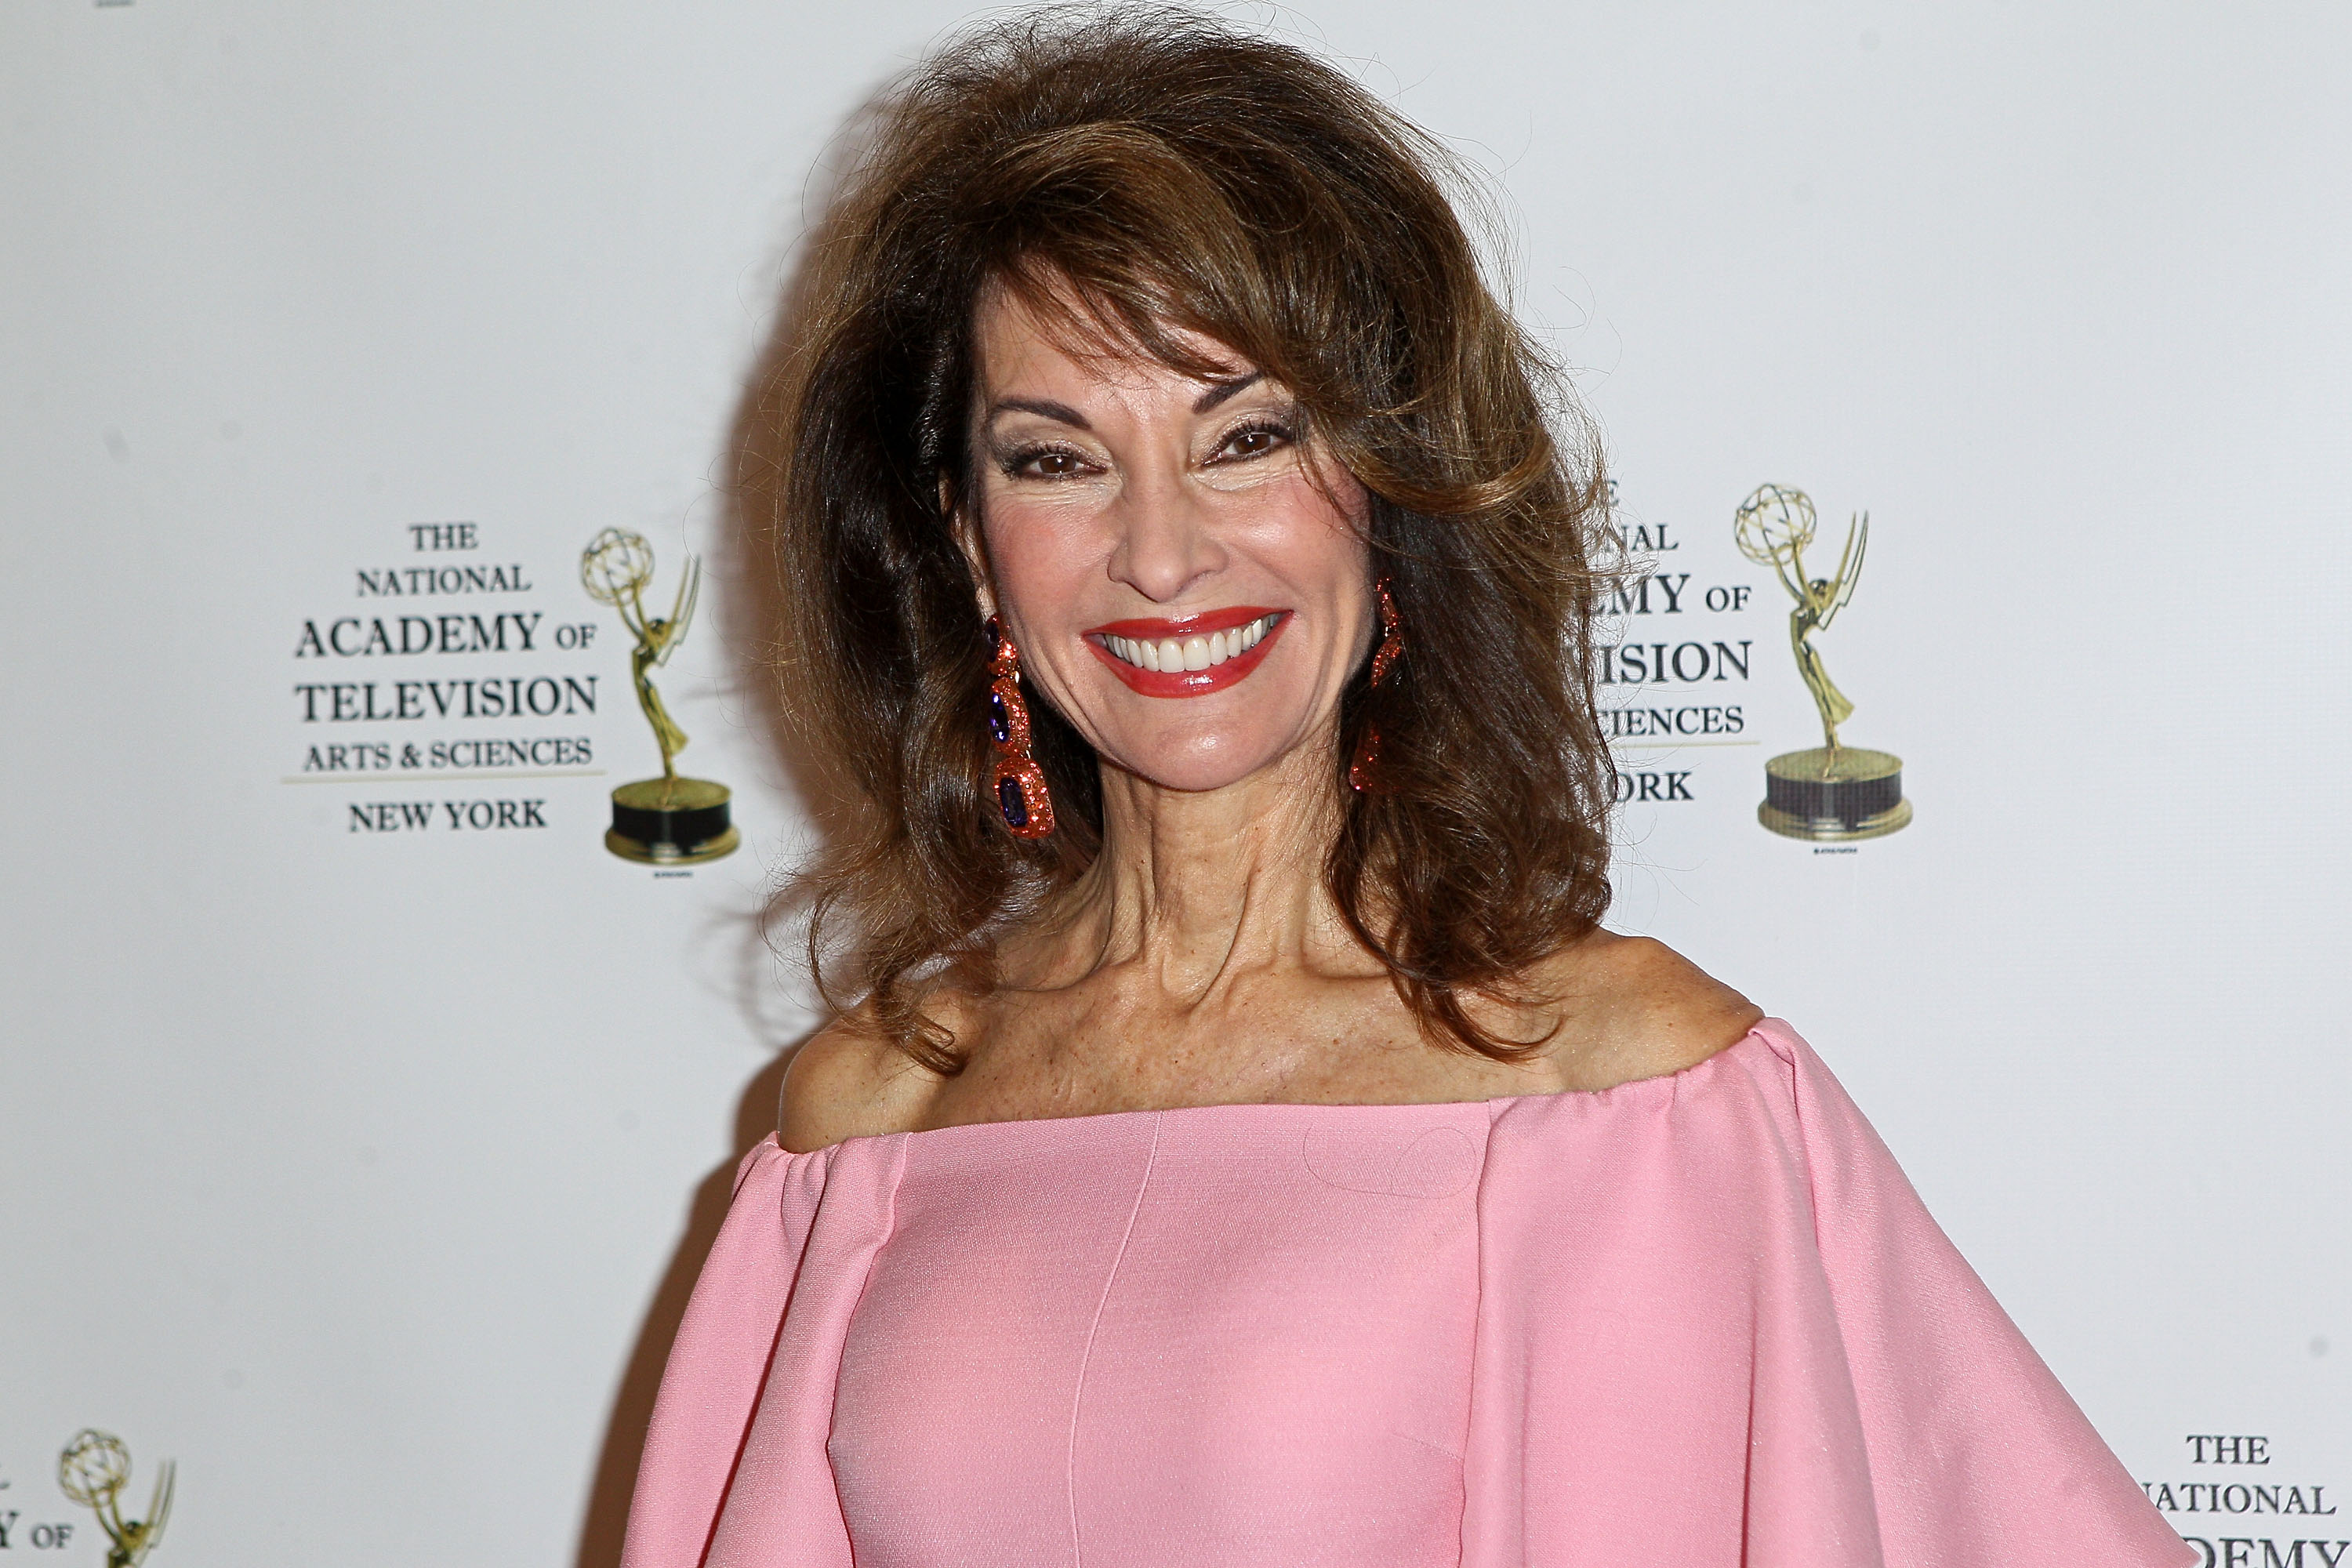 Is Susan Lucci Retiring? Find out Here!